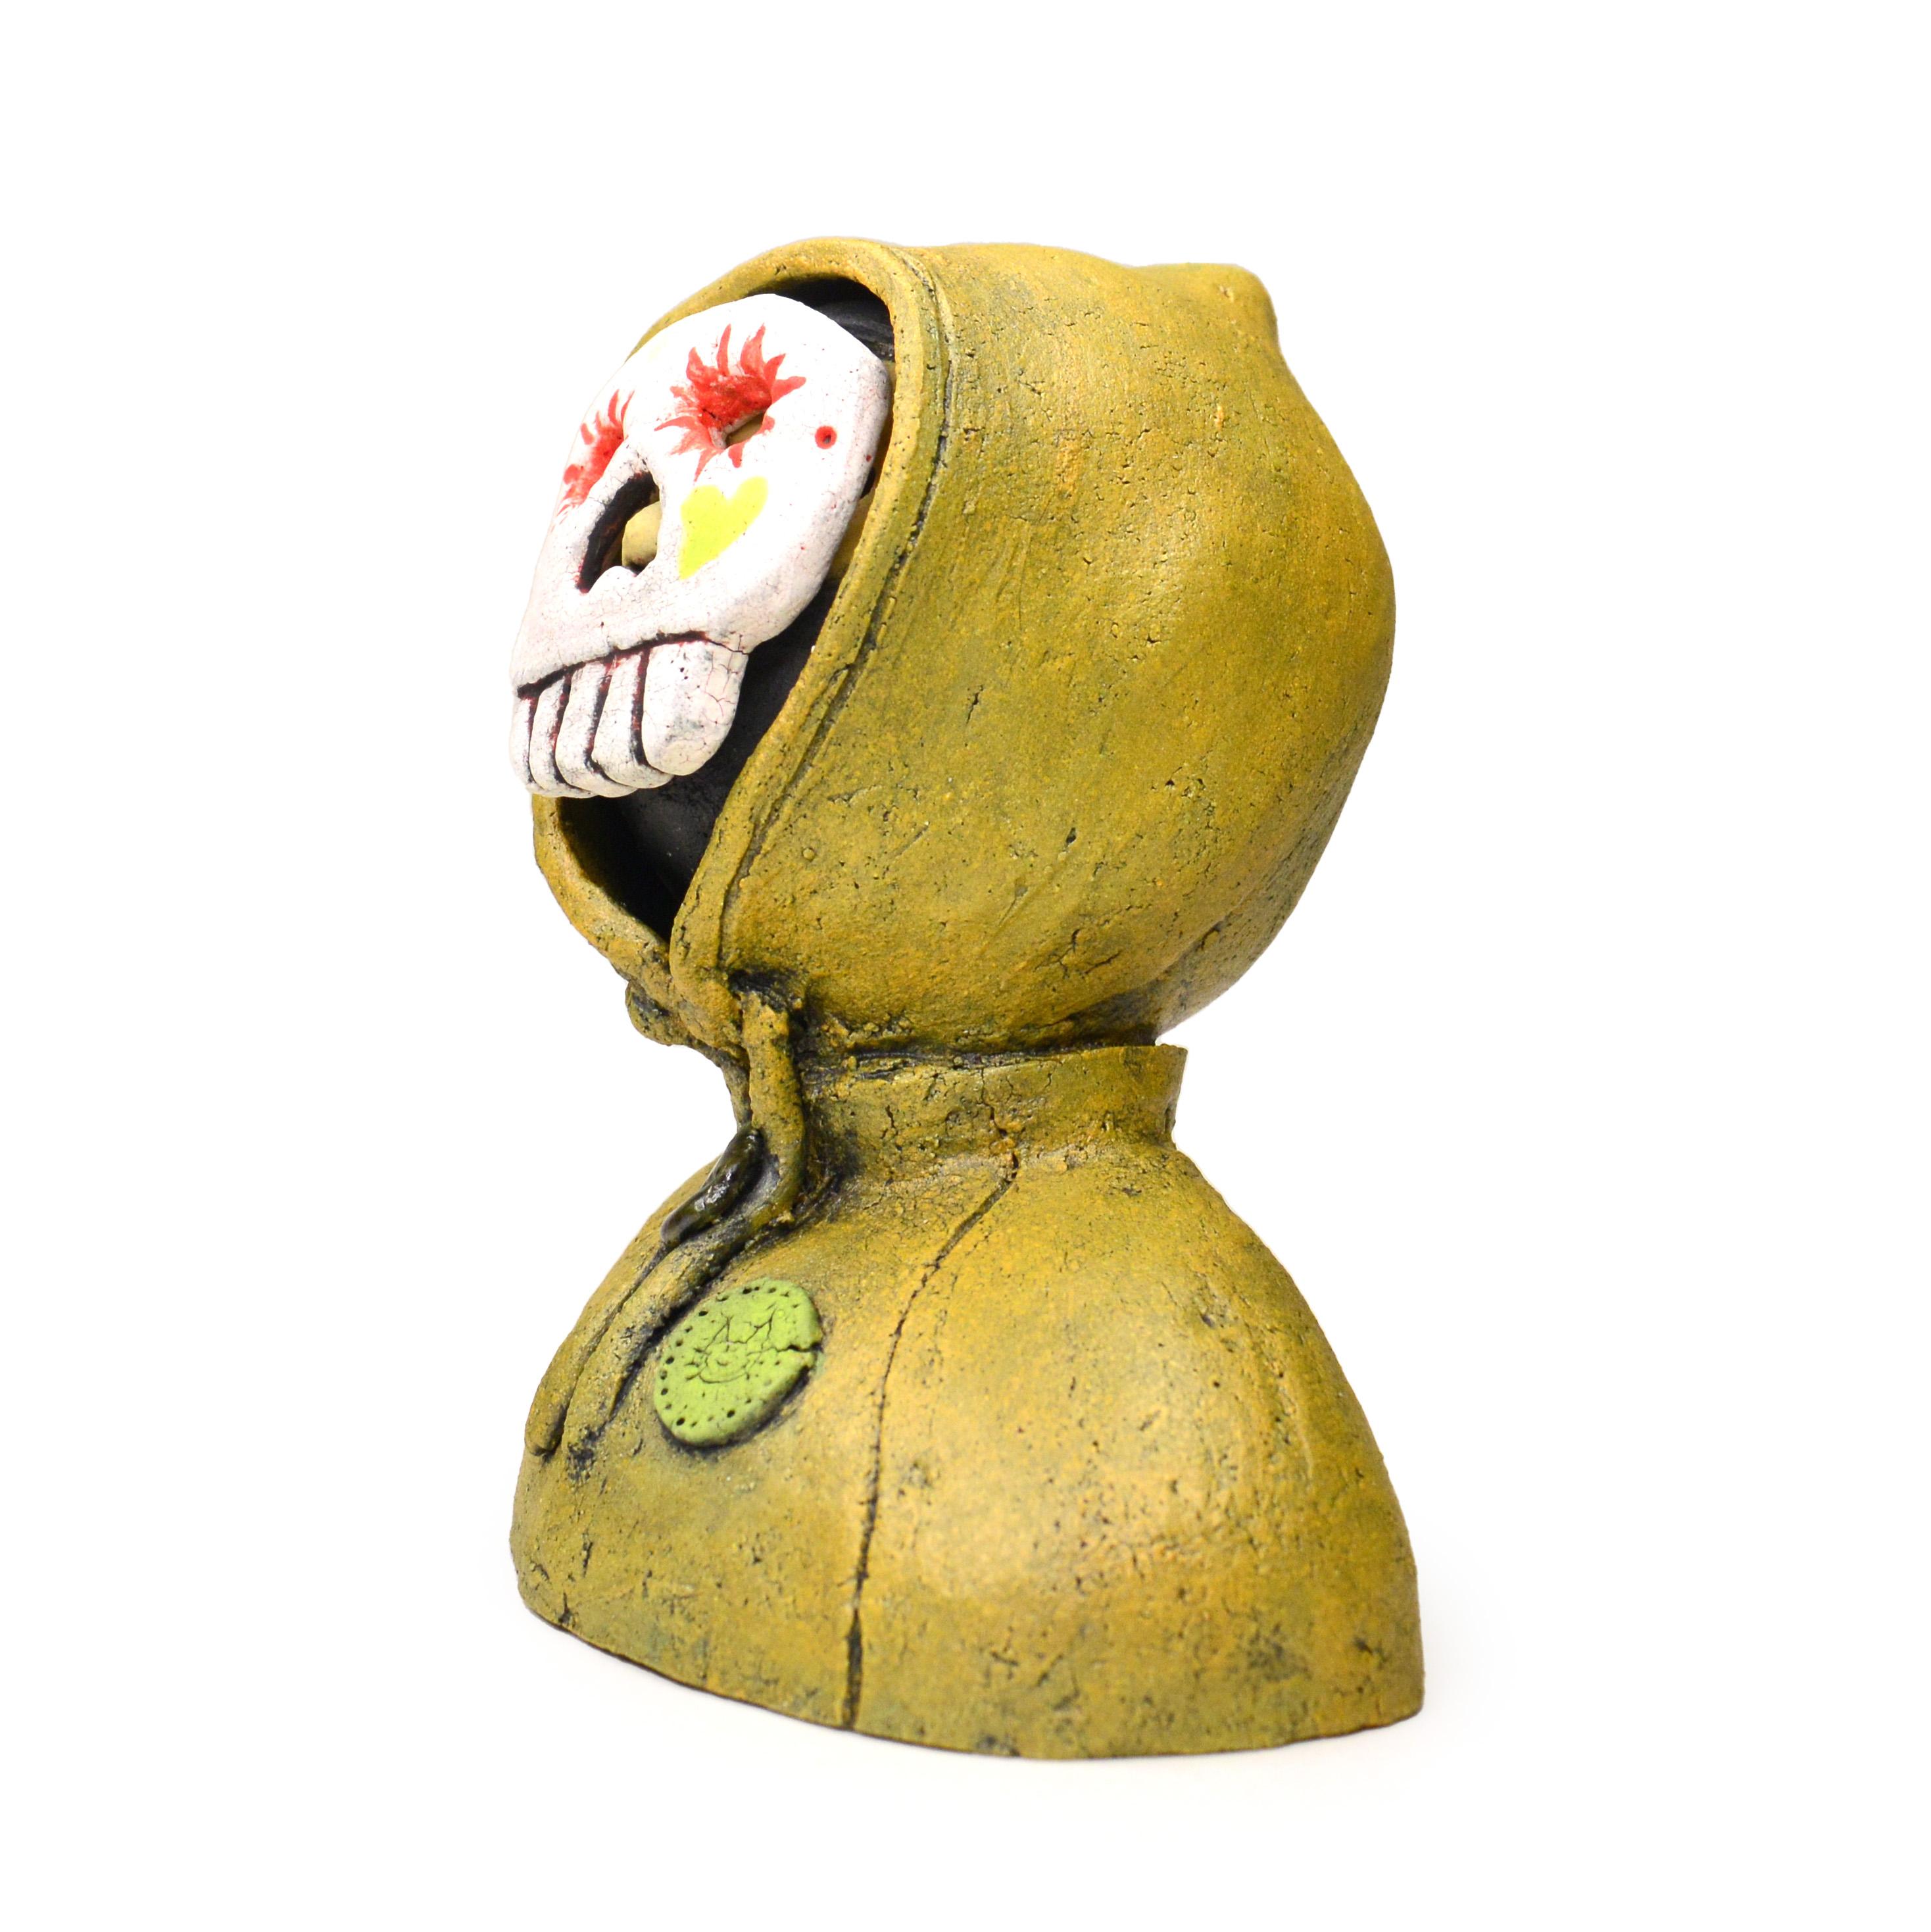 Pineco number 0006 Original Ceramic sculpture wearing a hoodie and a Calacas mask representing the eternal cycle of life.

Meet a variety of characters with distinct masks and postures. These sculptures are fascinating and make you curious,